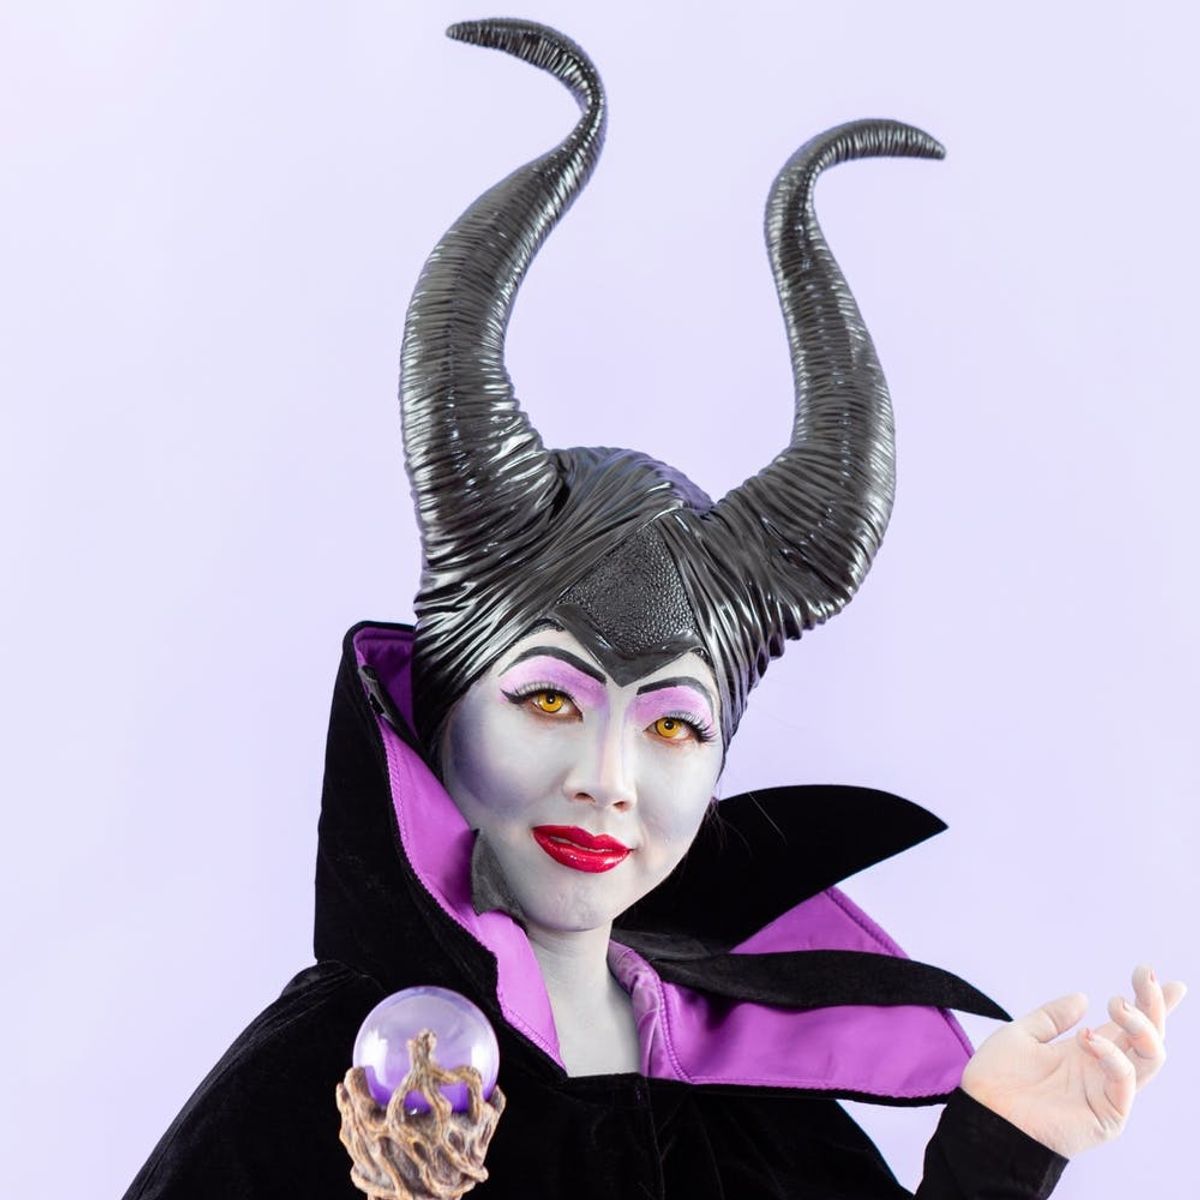 These DIY Disney Villain Halloween Costumes Will Make You Forget About Being a Princess